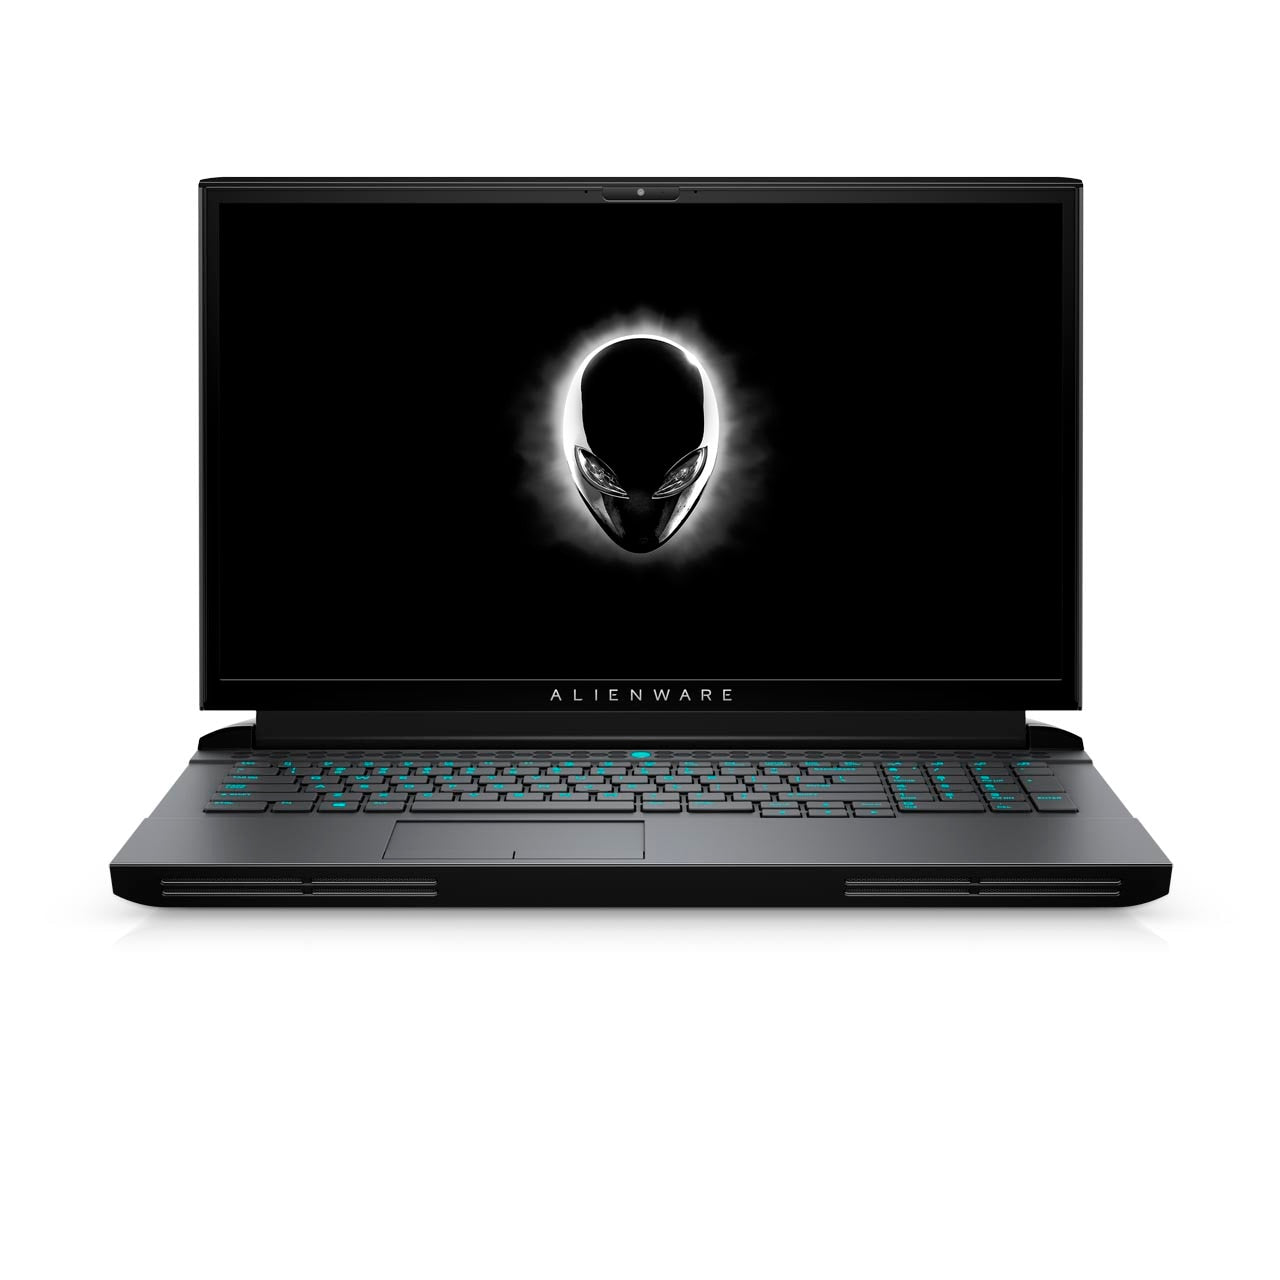 BSB-GXIY97RSTNWME95K-NEW-NEW-LAP-DL 2020 Dell Alienware 51m R2 Laptop 17.3" - i7 - i7-10700K - Eight Core 5.1Ghz - 1TB + 512GB SSD - 16GB RAM - Nvidia GeForce RTX 2070 Super - 1920x1080 FHD - Windows 10 Home Light